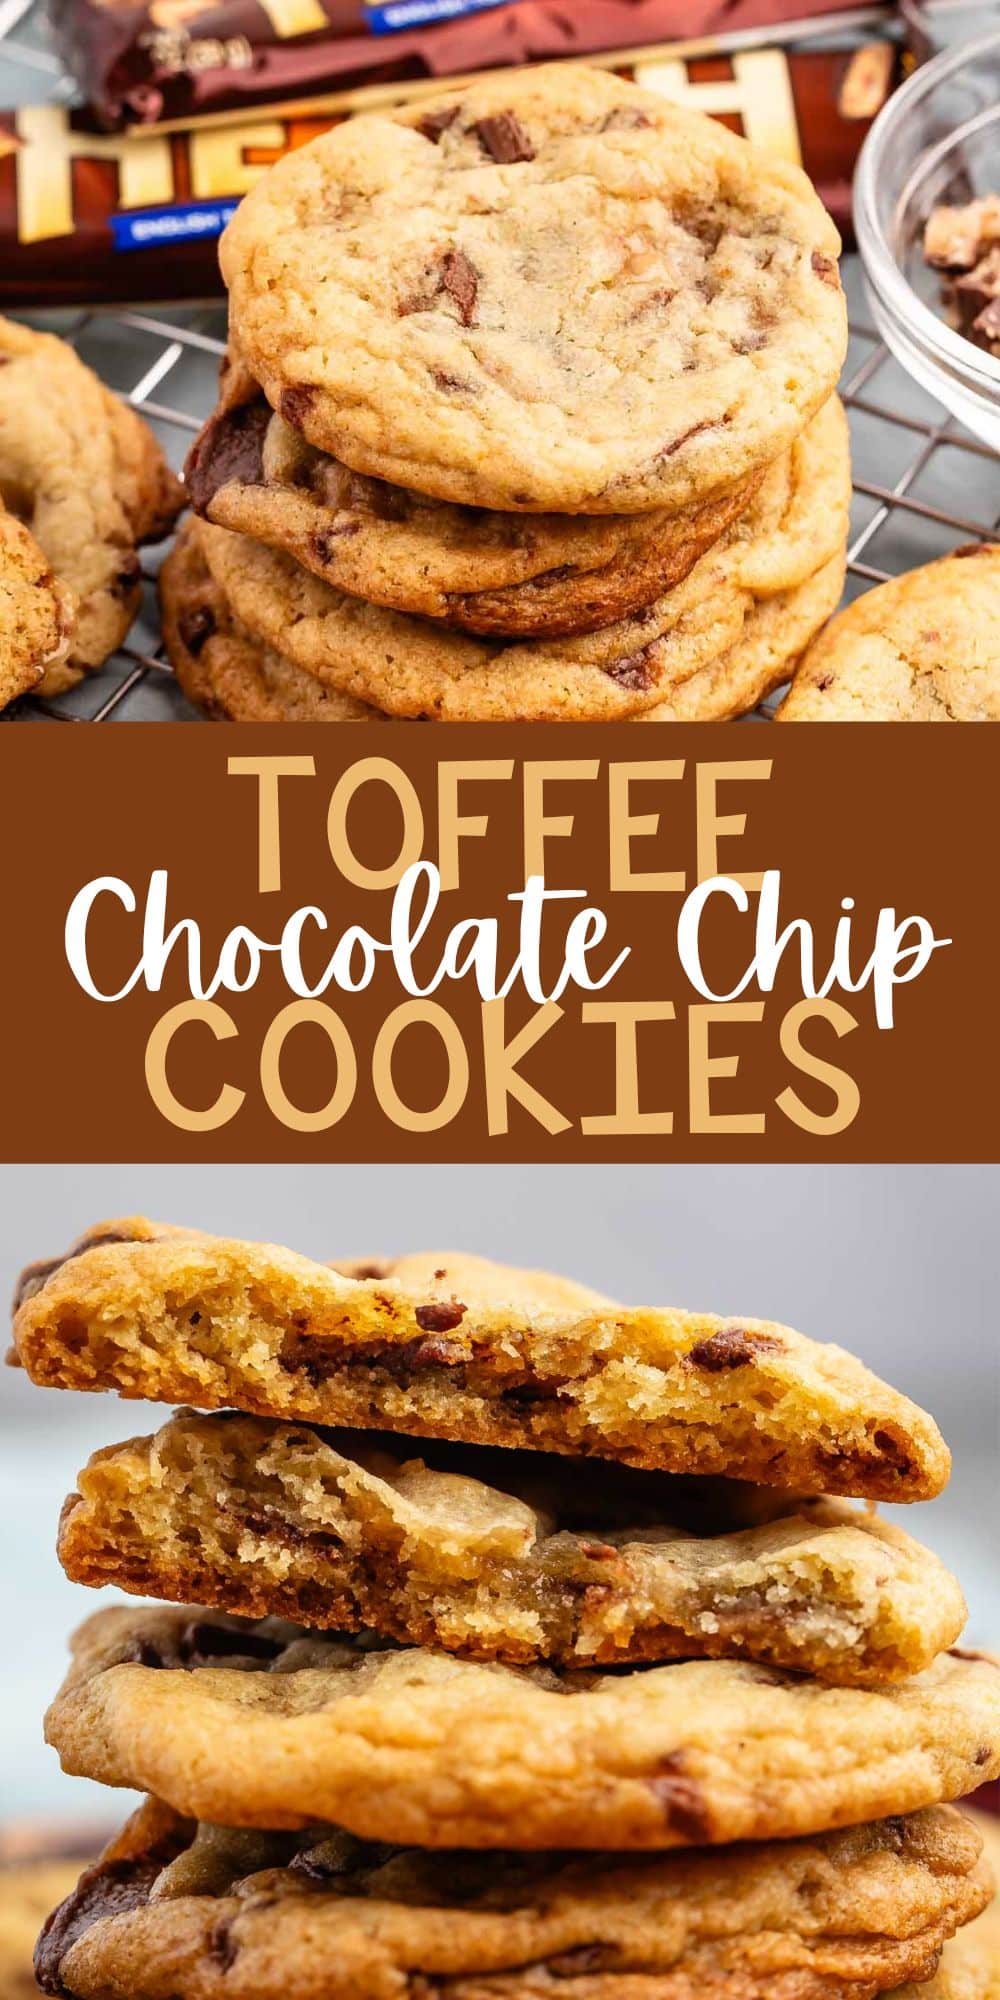 two photos of stacked cookies with heath bars baked in and around the cookies with words on the image.